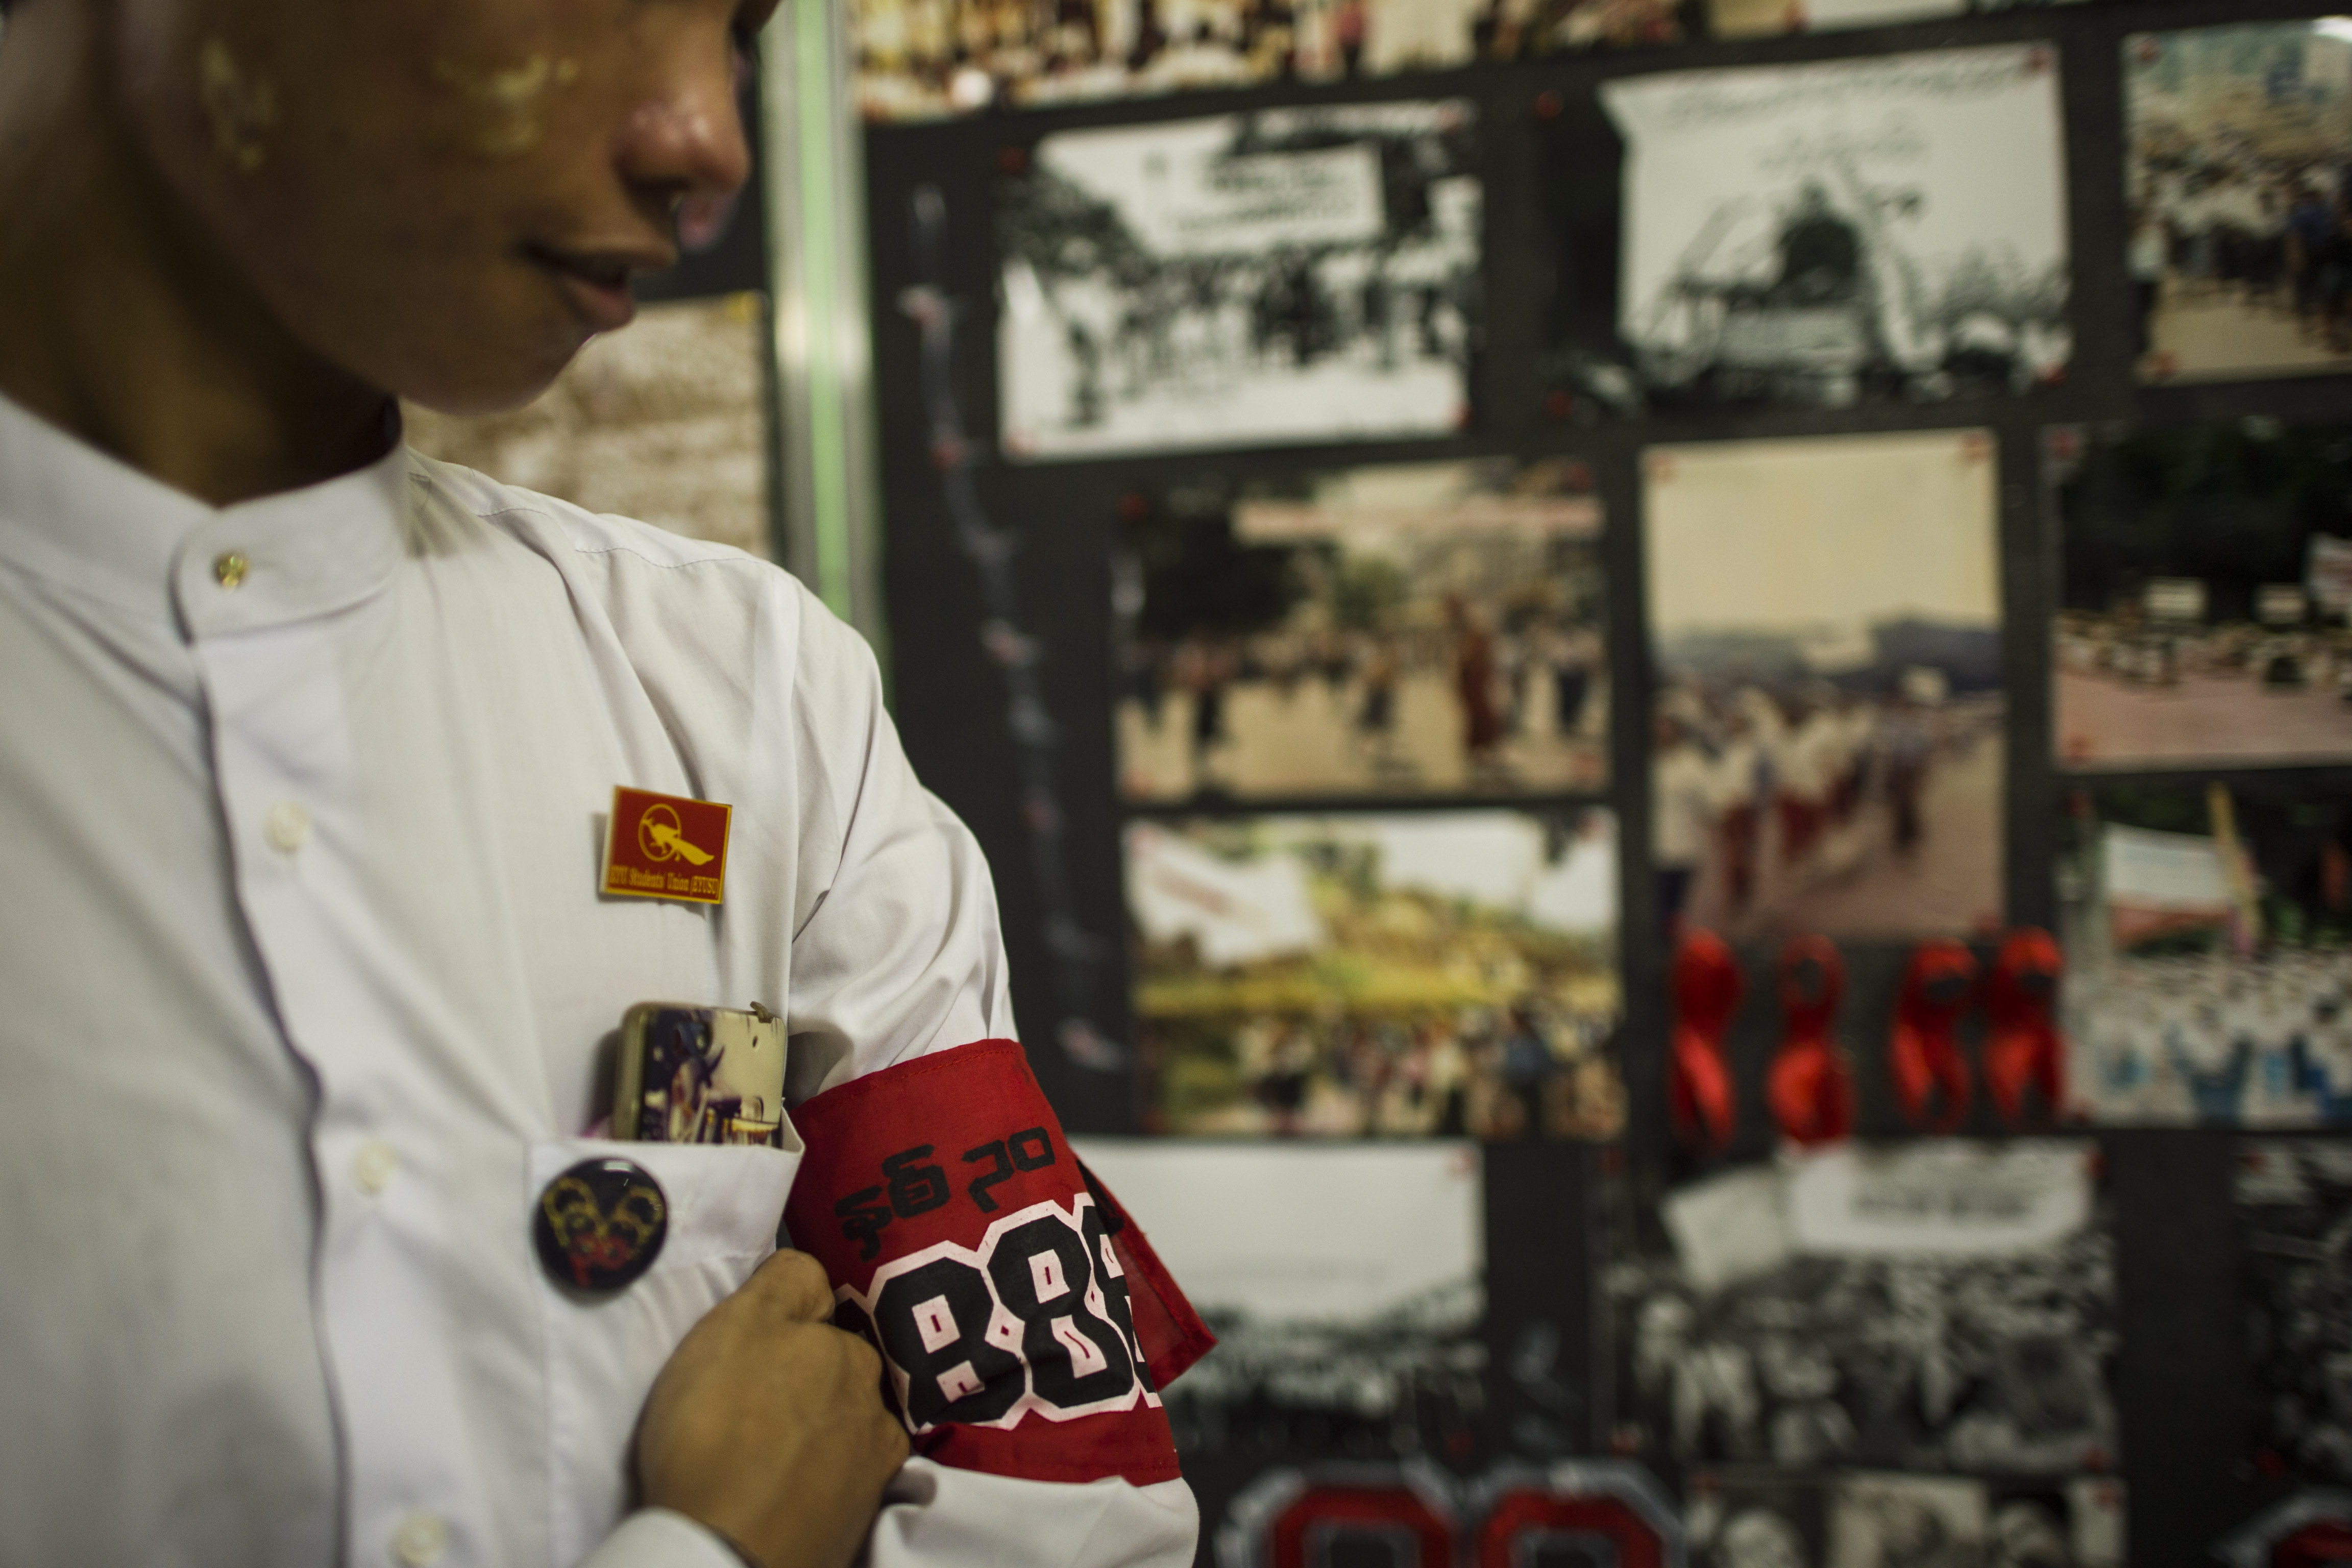 A student wearing an armband stands next to a photo exhibition held as part of events to commemorate the 30th anniversary of the 8888 Uprising at the University of Yangon on Aug. 6, 2018. (Ye Aung Thu—AFP/Getty Images)